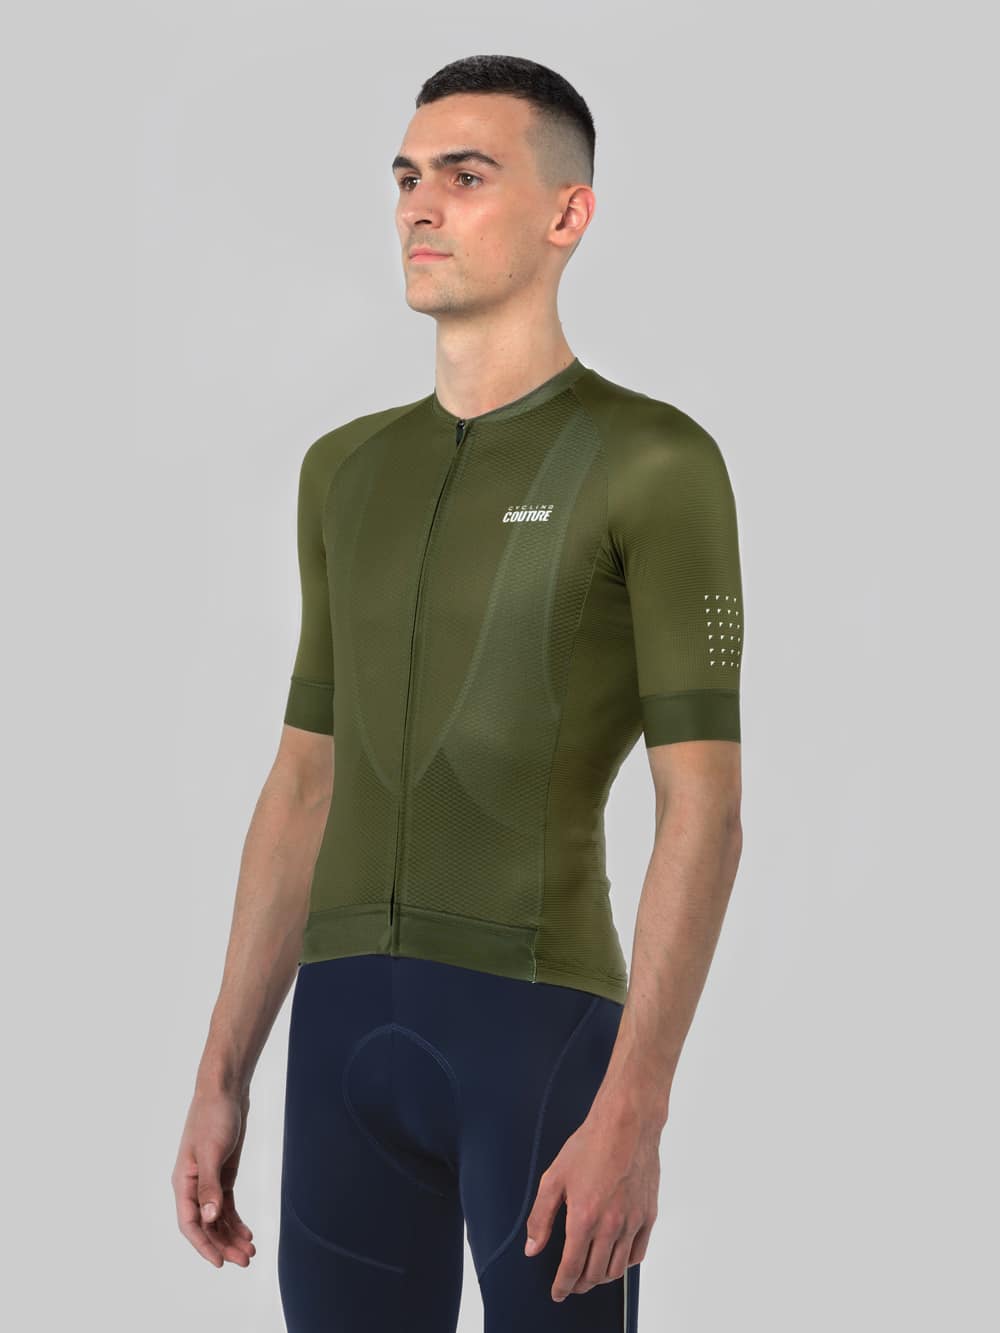 Men's | Cycling Apparel | Cycling Couture